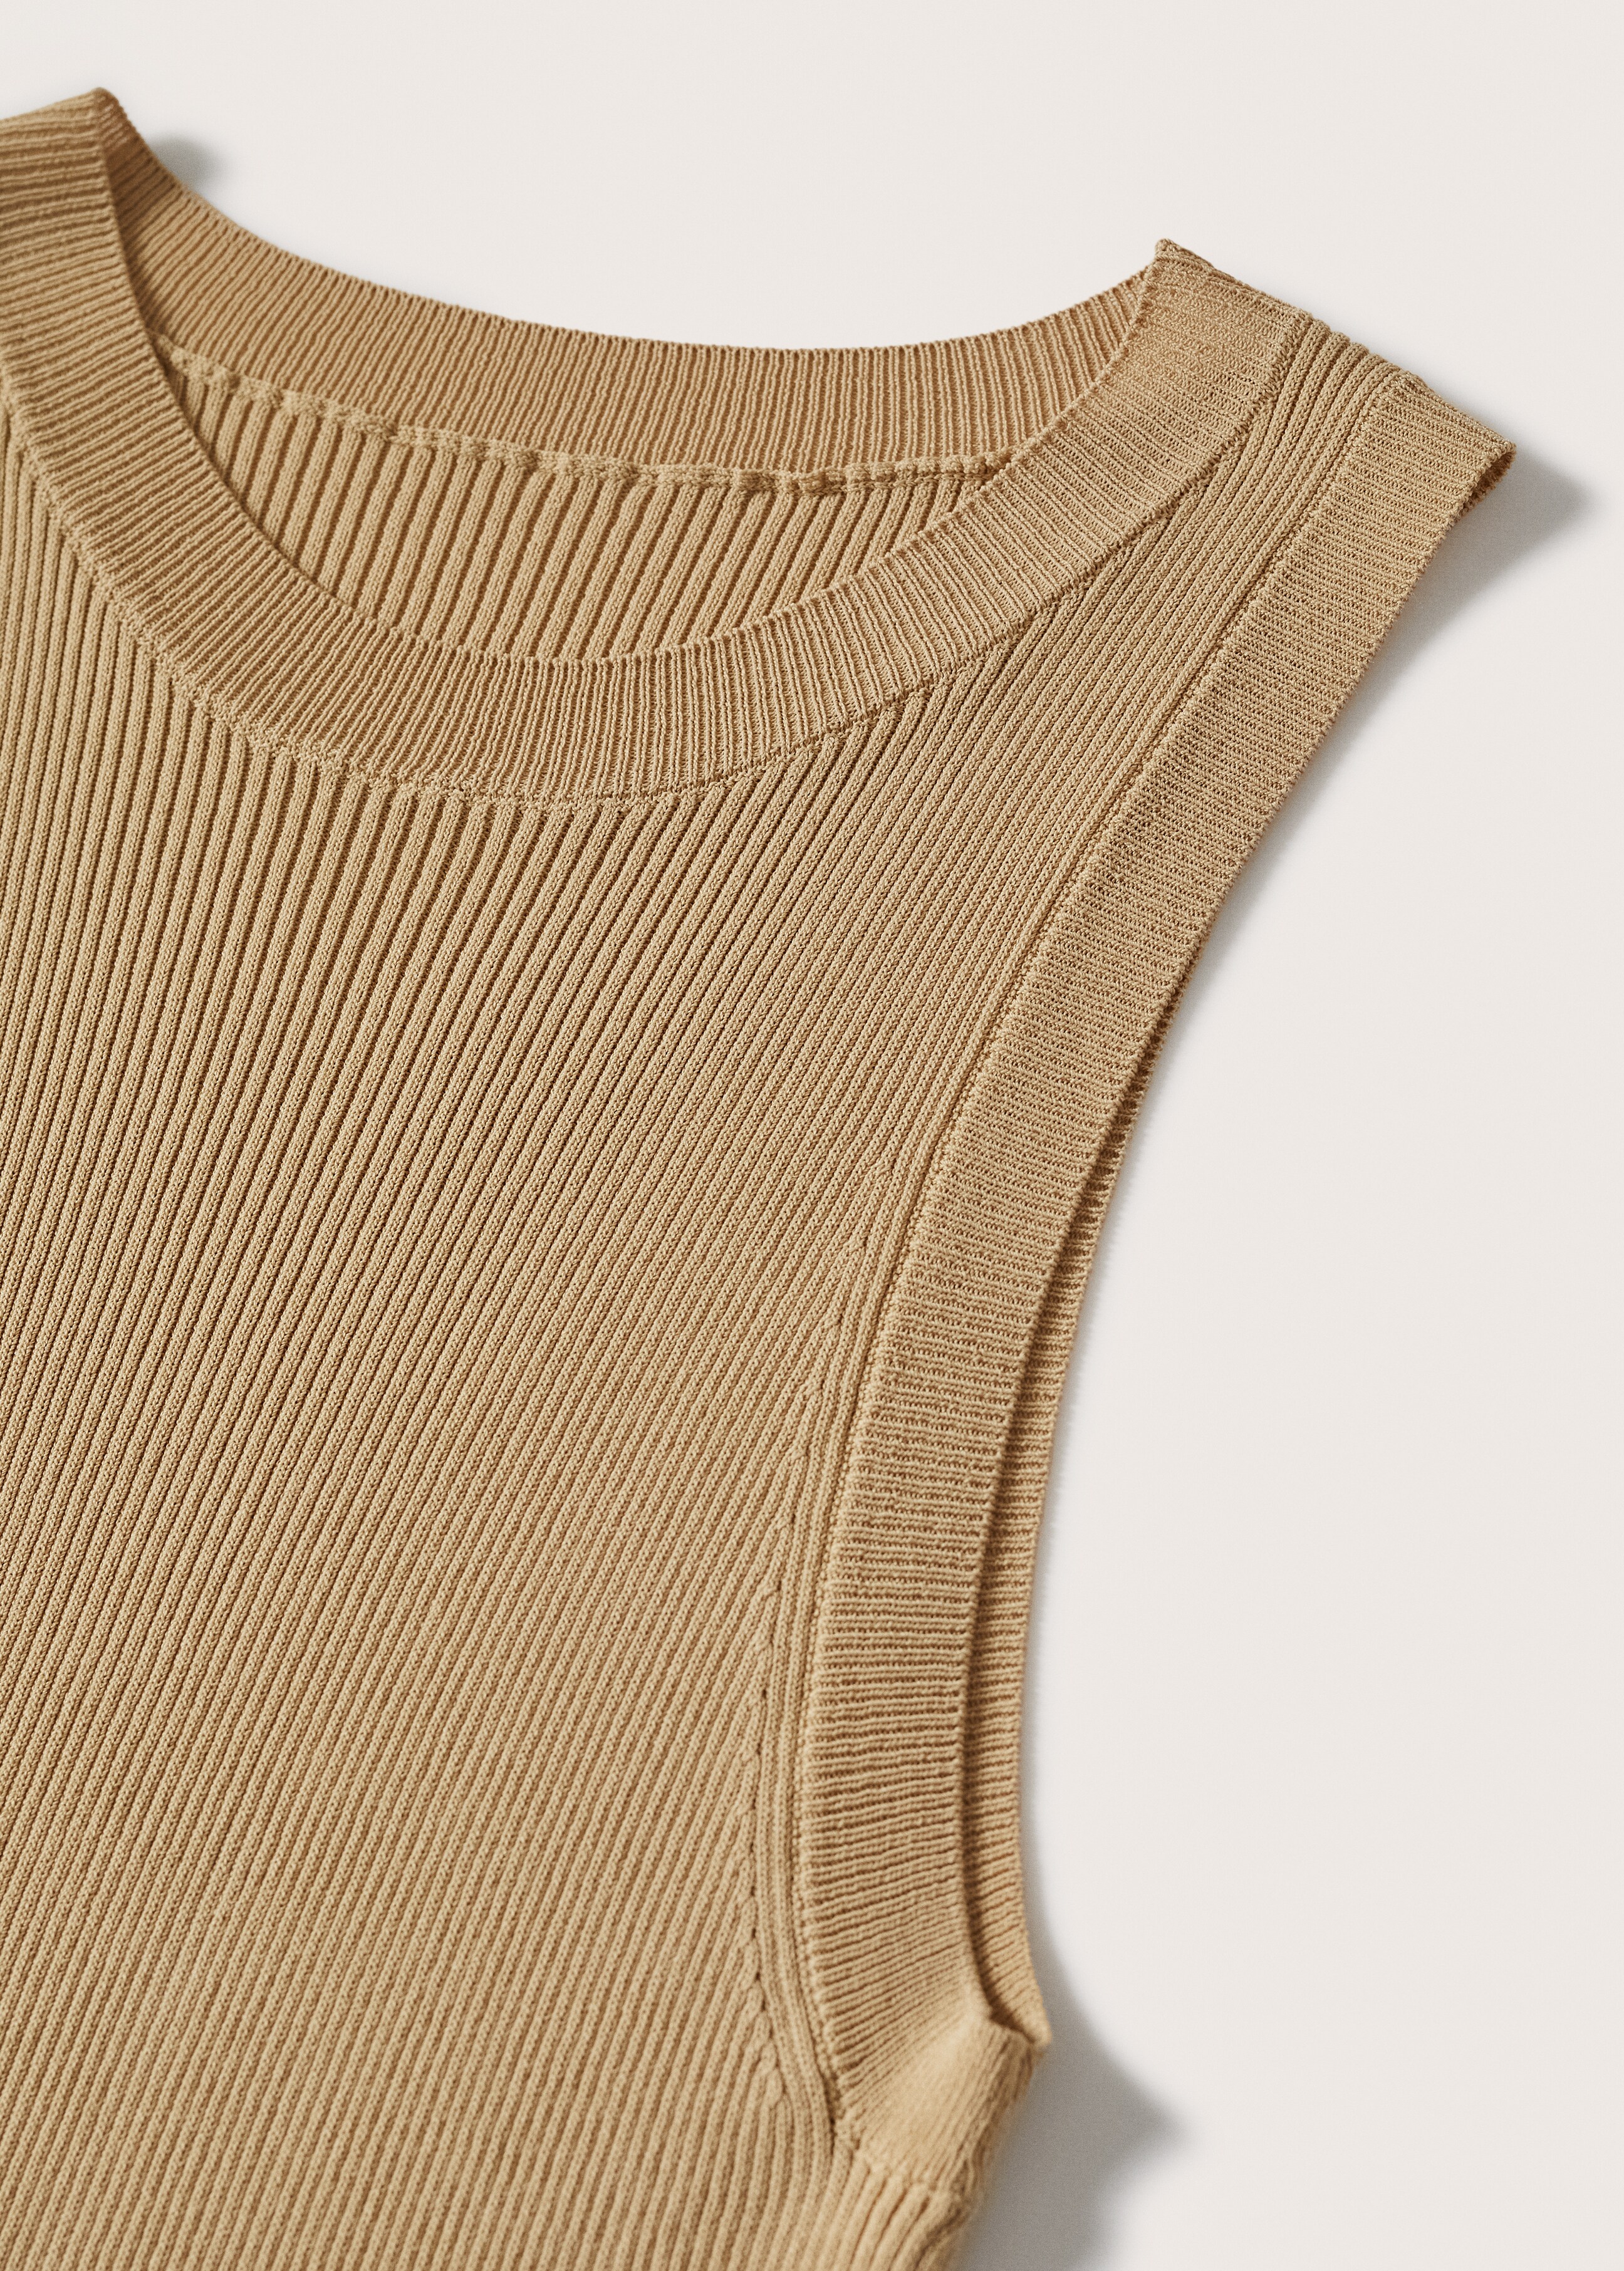 Ribbed knit dress - Details of the article 8